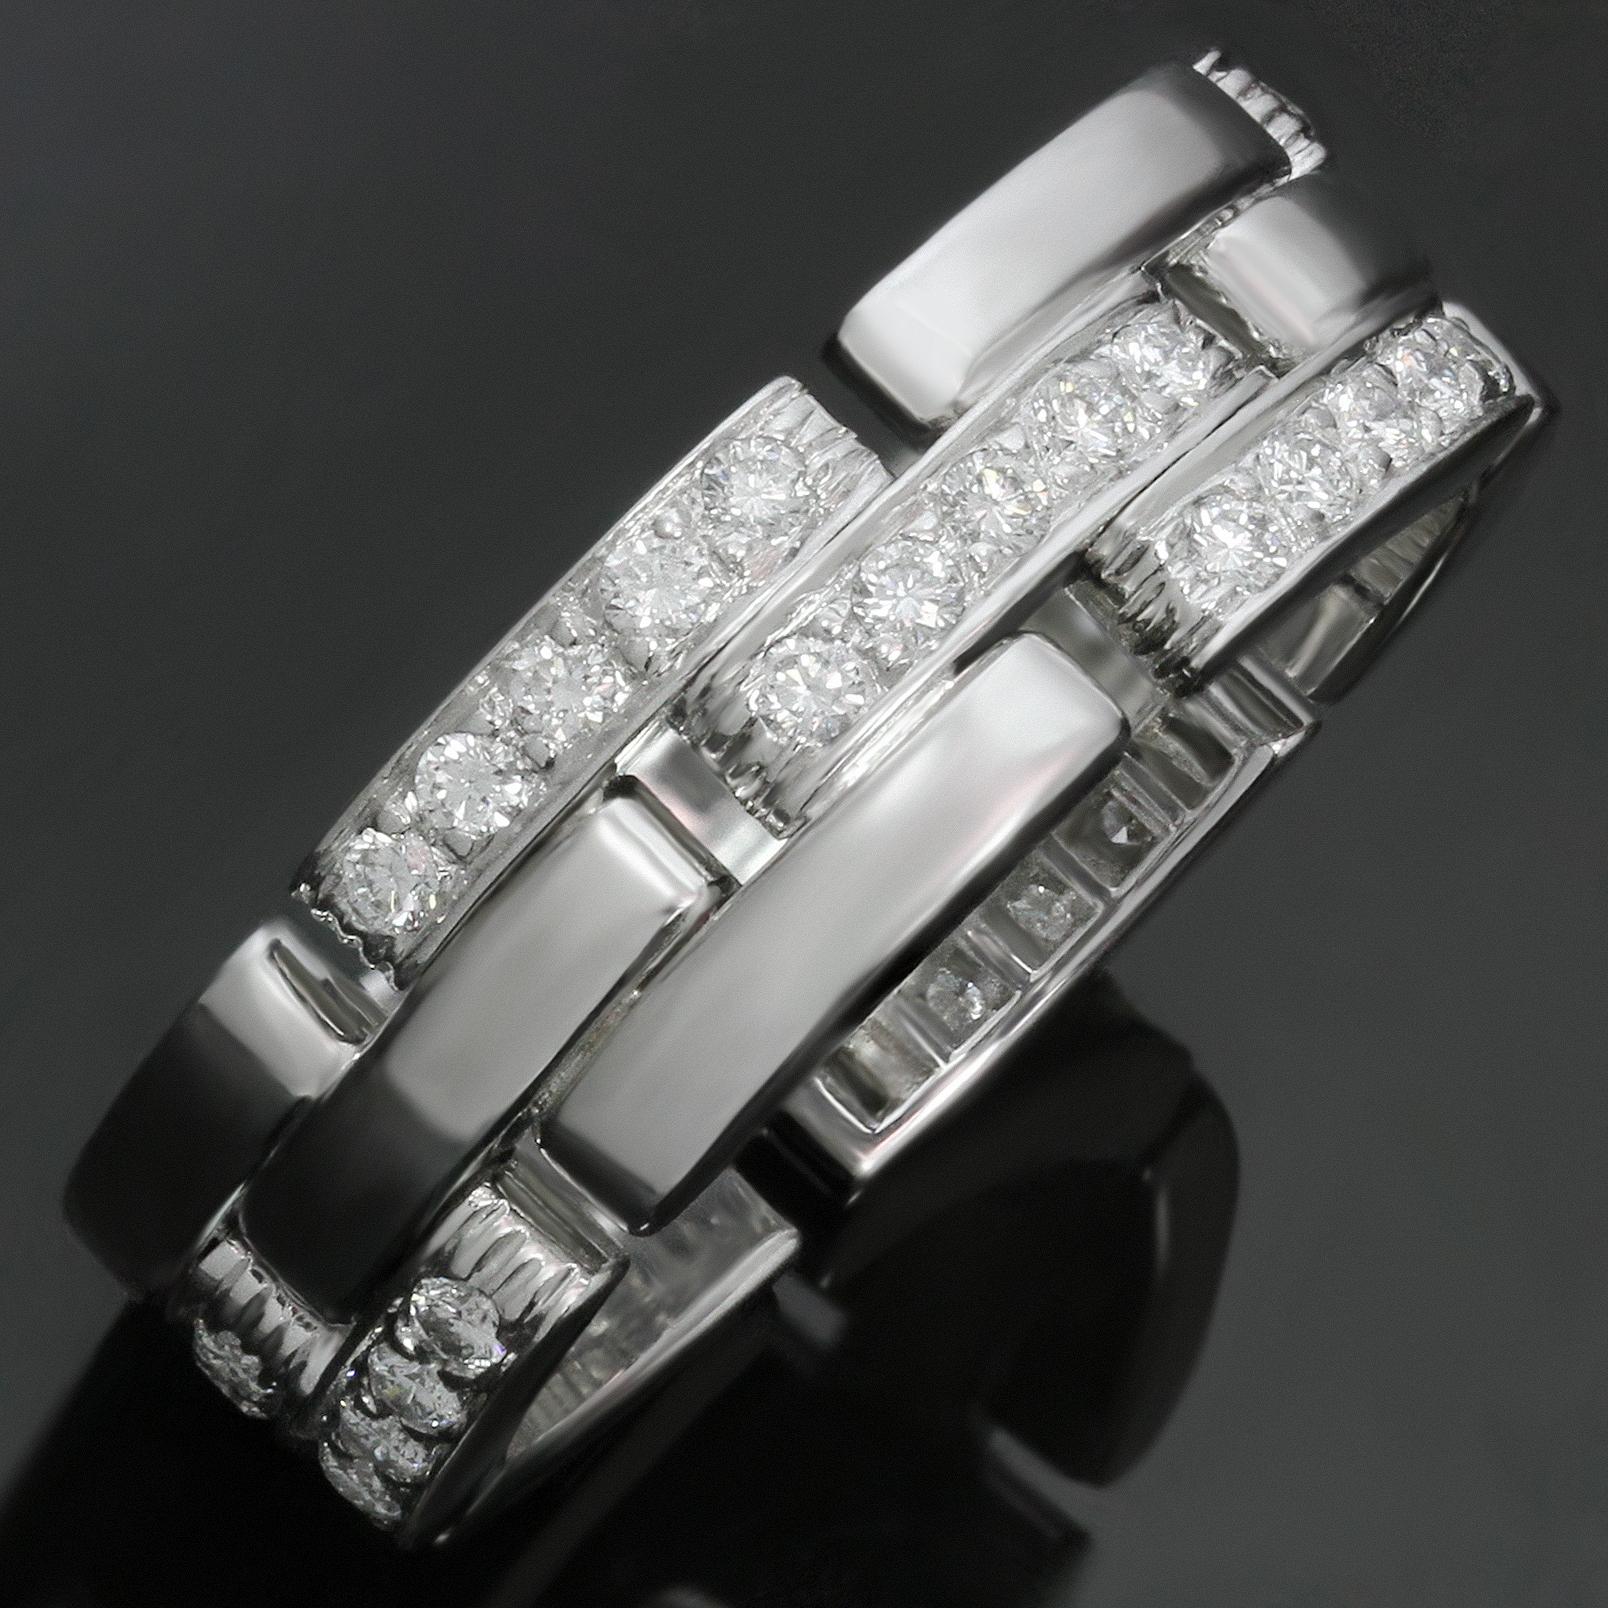 This timeless Cartier band from the iconic Maillon Panthere collection features 3 rows of links crafted in 18k white gold links, with half of the links pave-set with brilliant-cut round diamonds of an estimated 0.70 carats. The ring comes with